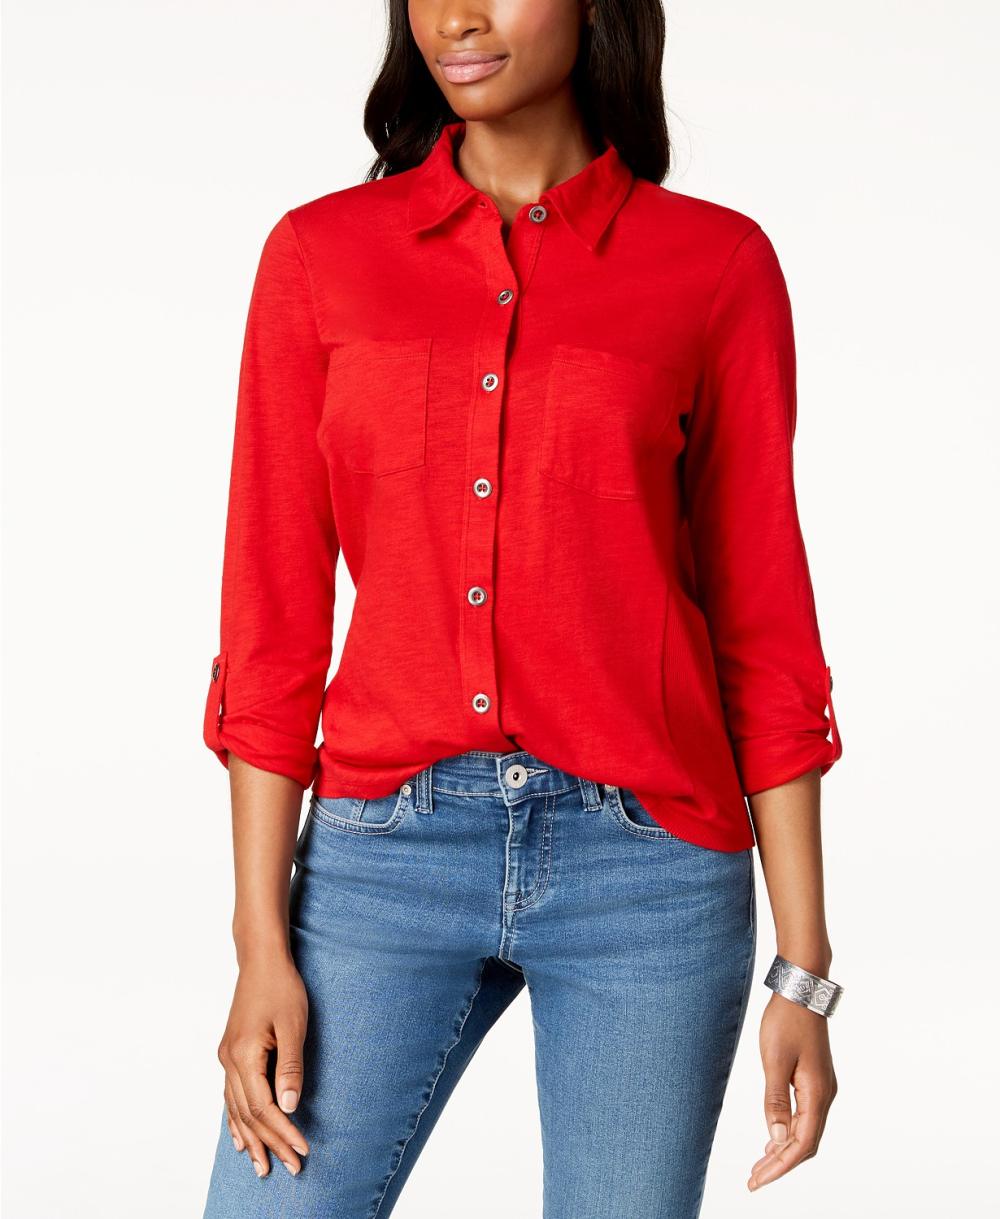 red button down shirt blouse